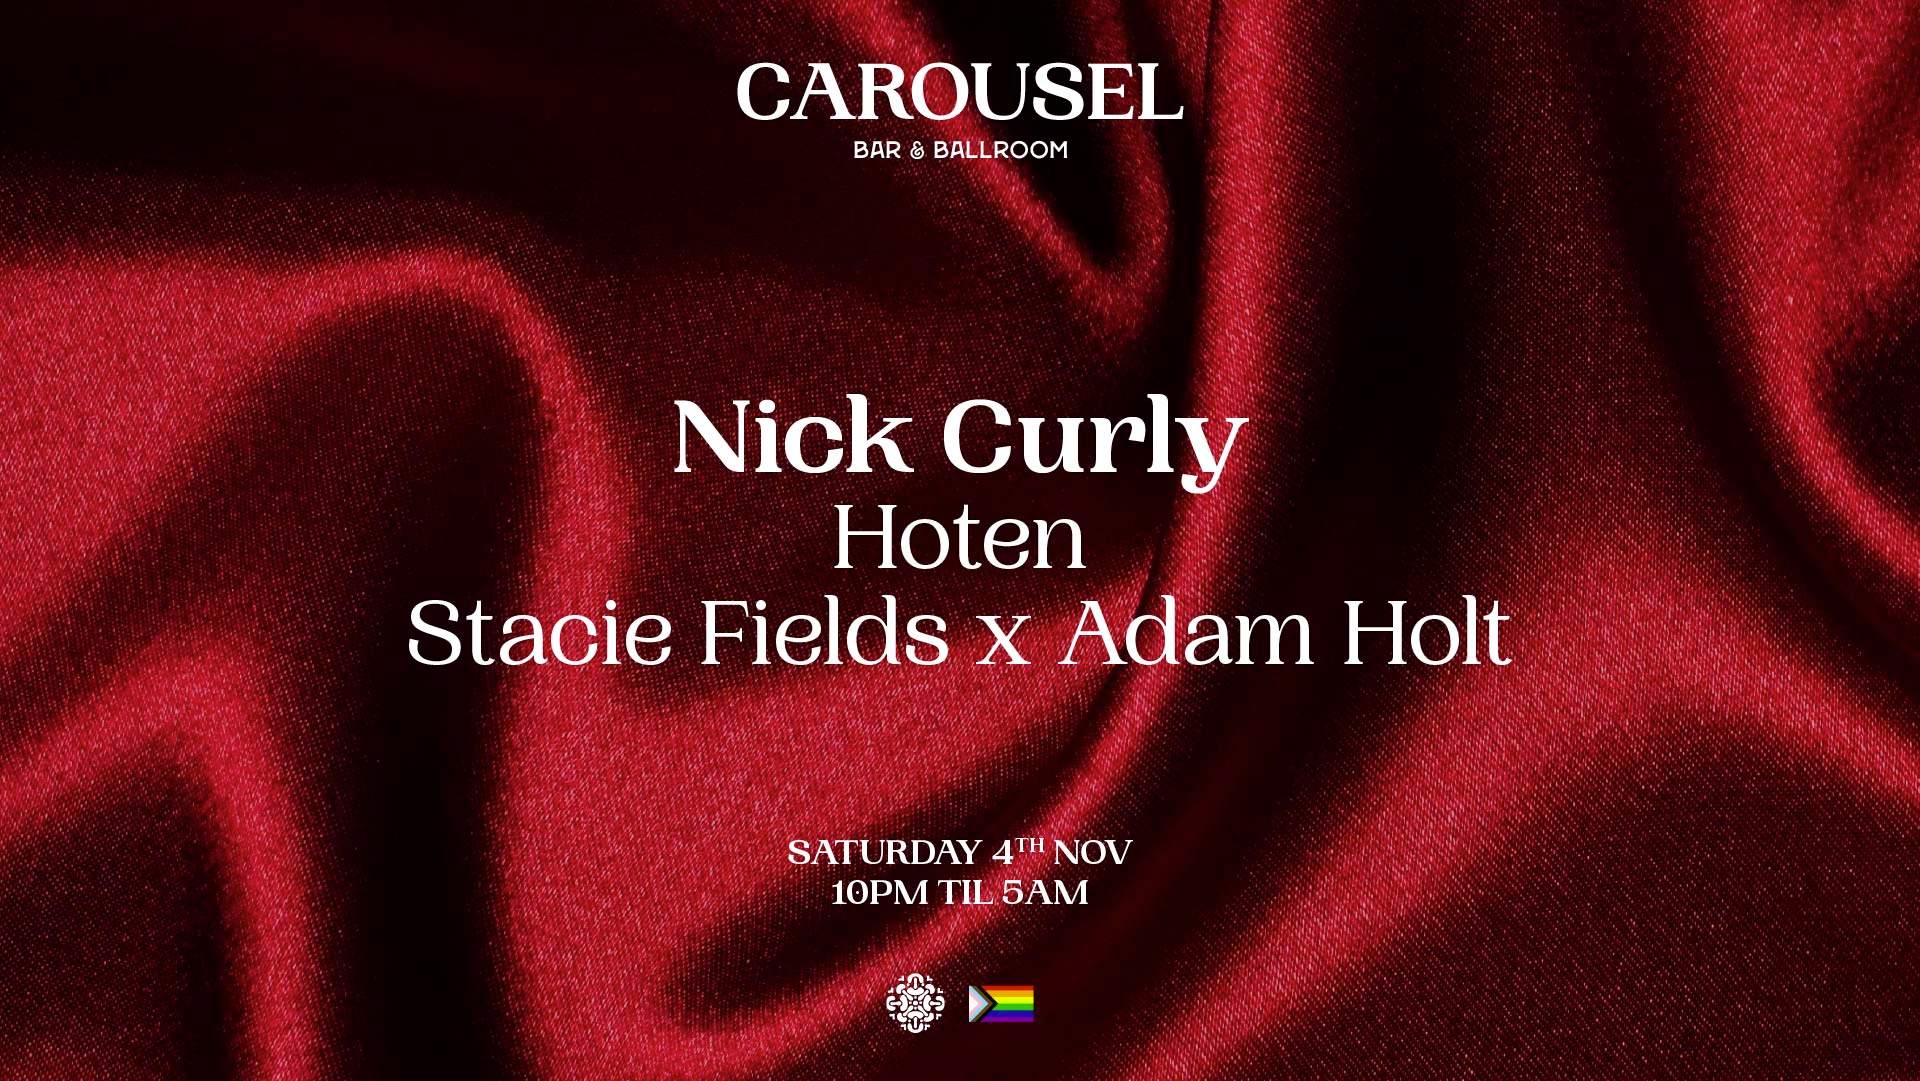 Carousel PRES. NICK CURLY - フライヤー表